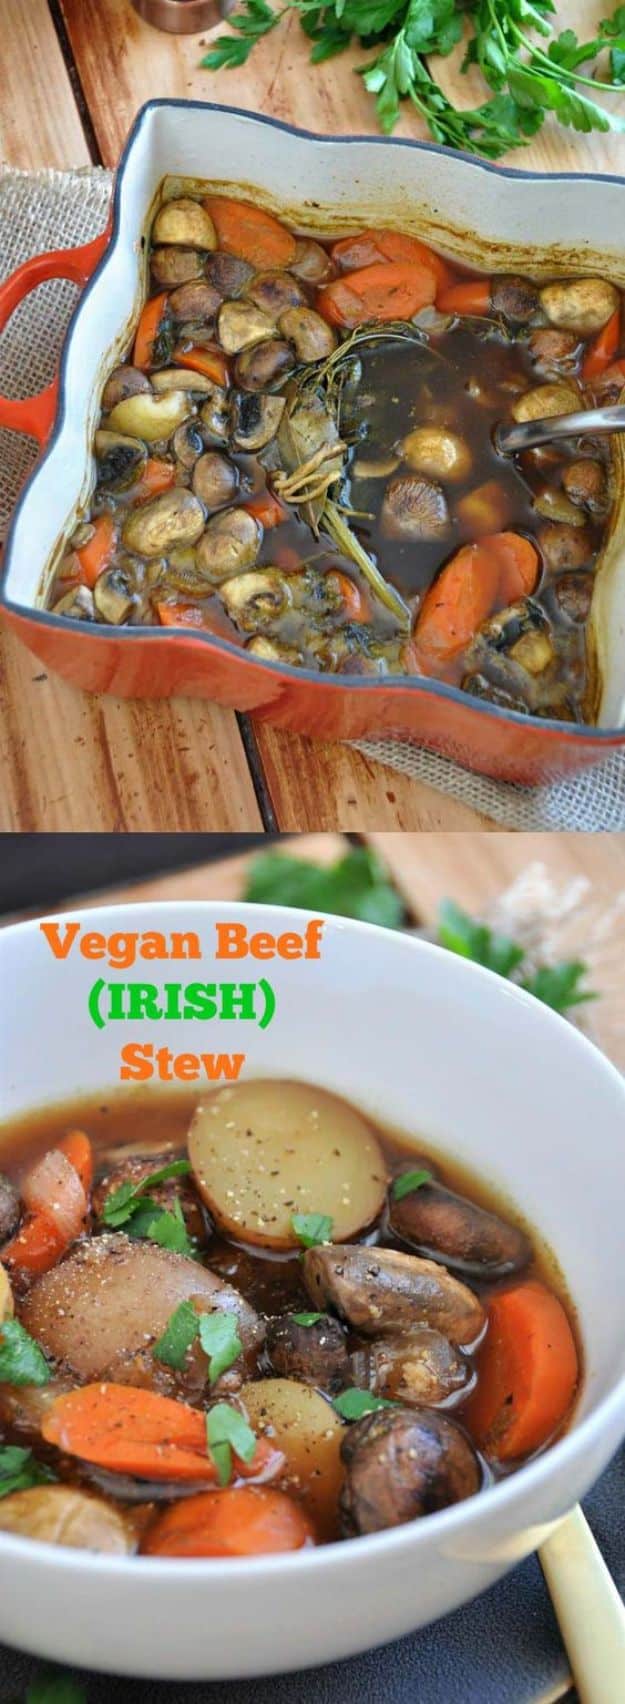 St Patrick's Day Food and Recipe Ideas - Vegan Beef Irish Stew - DIY St. Patrick's Day Party Recipes for Dinner, Desserts, Cookies, Cakes, Snacks, Dips and Drinks - Green Shamrocks, Leprechauns and Cute Party Foods - Easy Appetizers and Healthy Treats for Adults and Kids To Make - Potluck, Crockpot, Traditional and Corned Beef http://diyjoy.com/st-patricks-day-recipes